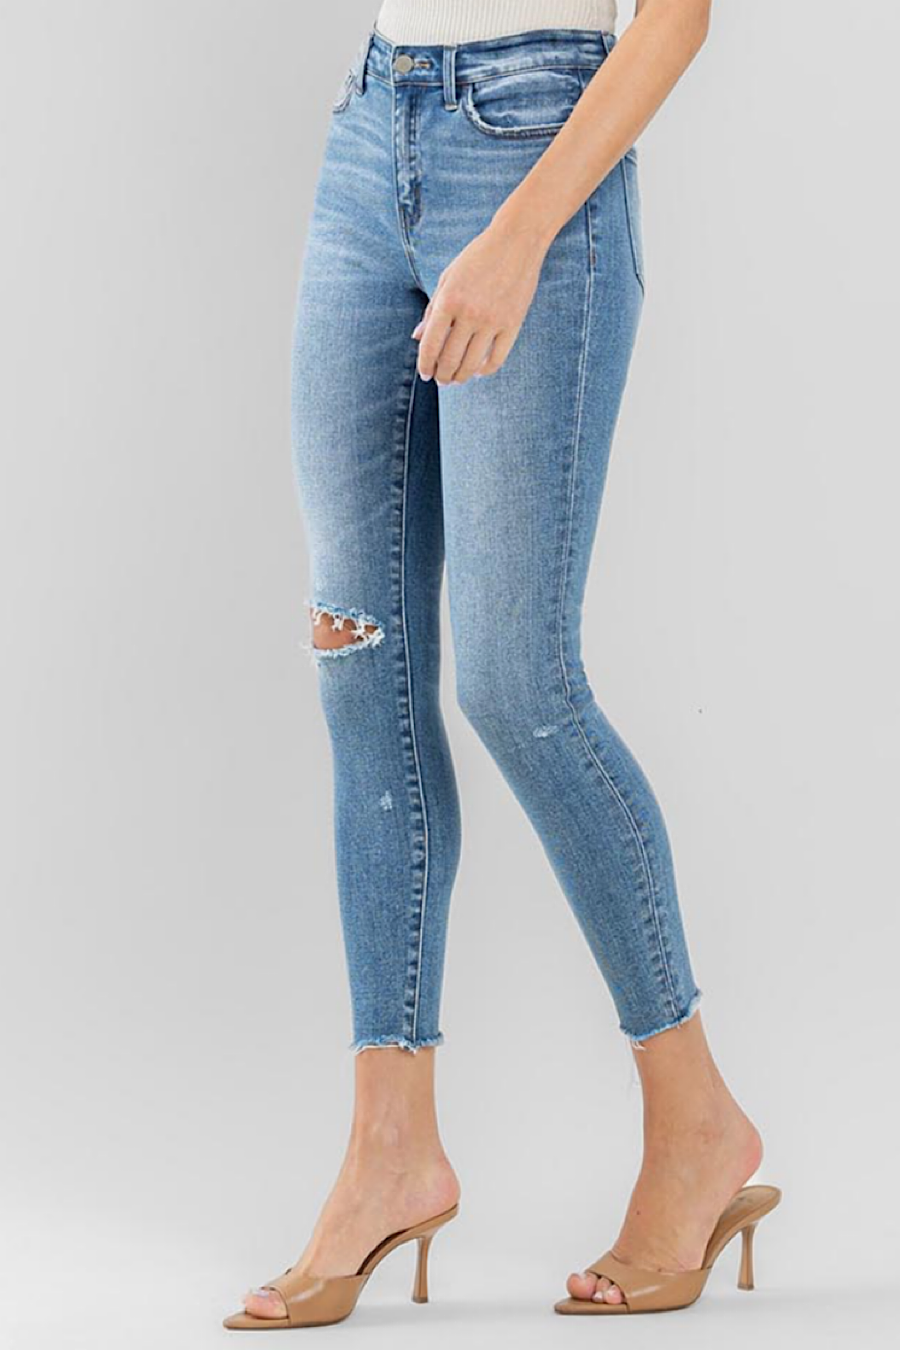 Achievable Ankle Skinny Jeans